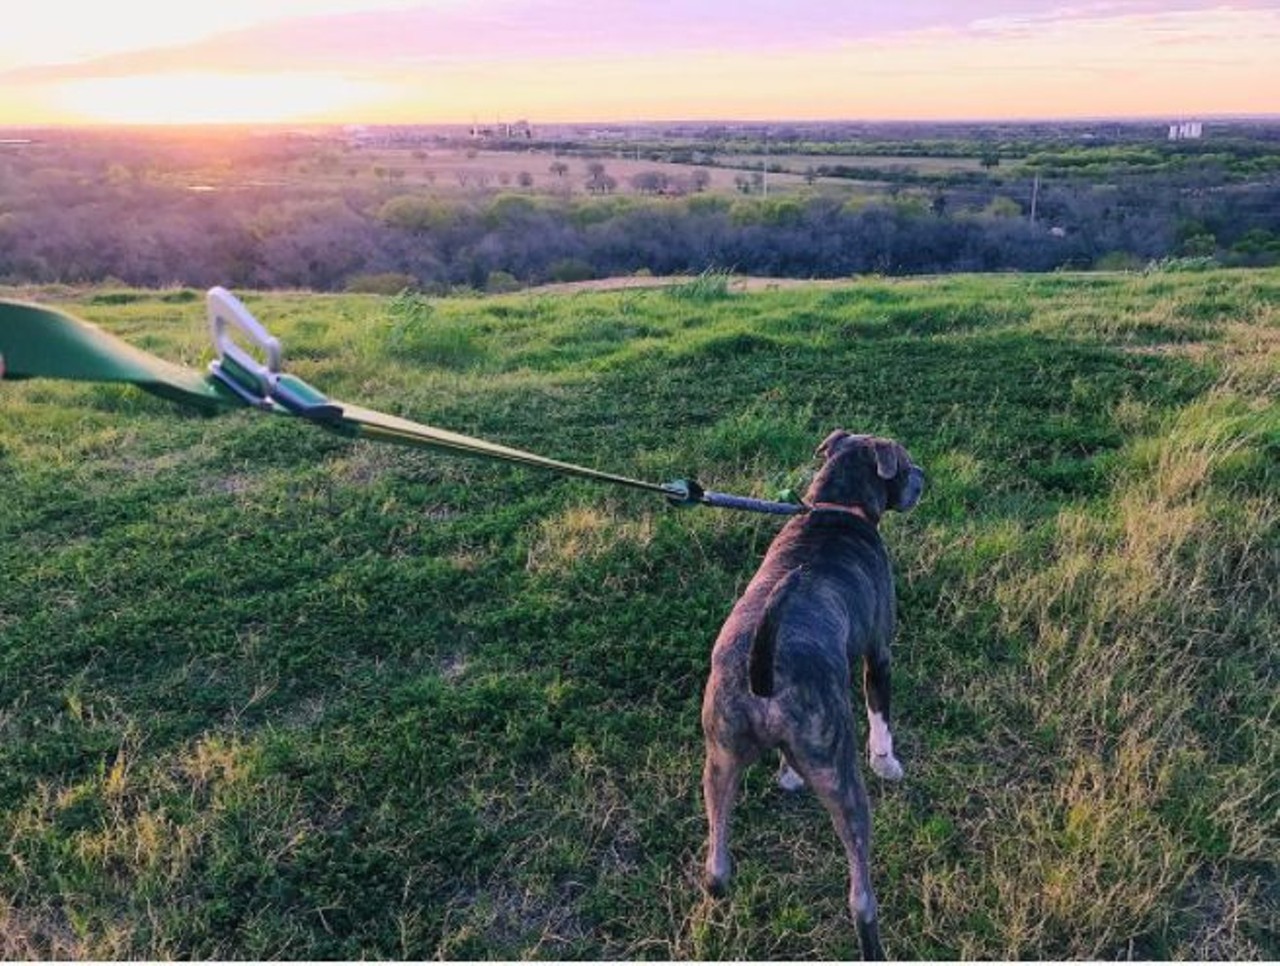 Pearsall Park
4700 Old Pearsall
This fenced-in park (actually the city&#146;s first-ever dog park) is now part of the new, revamped jewel of the Southwest Side,  compete with &#147;agility equipment&#148; for dogs, benches and fountains.
Photo via Instagram, adriacavanaugh